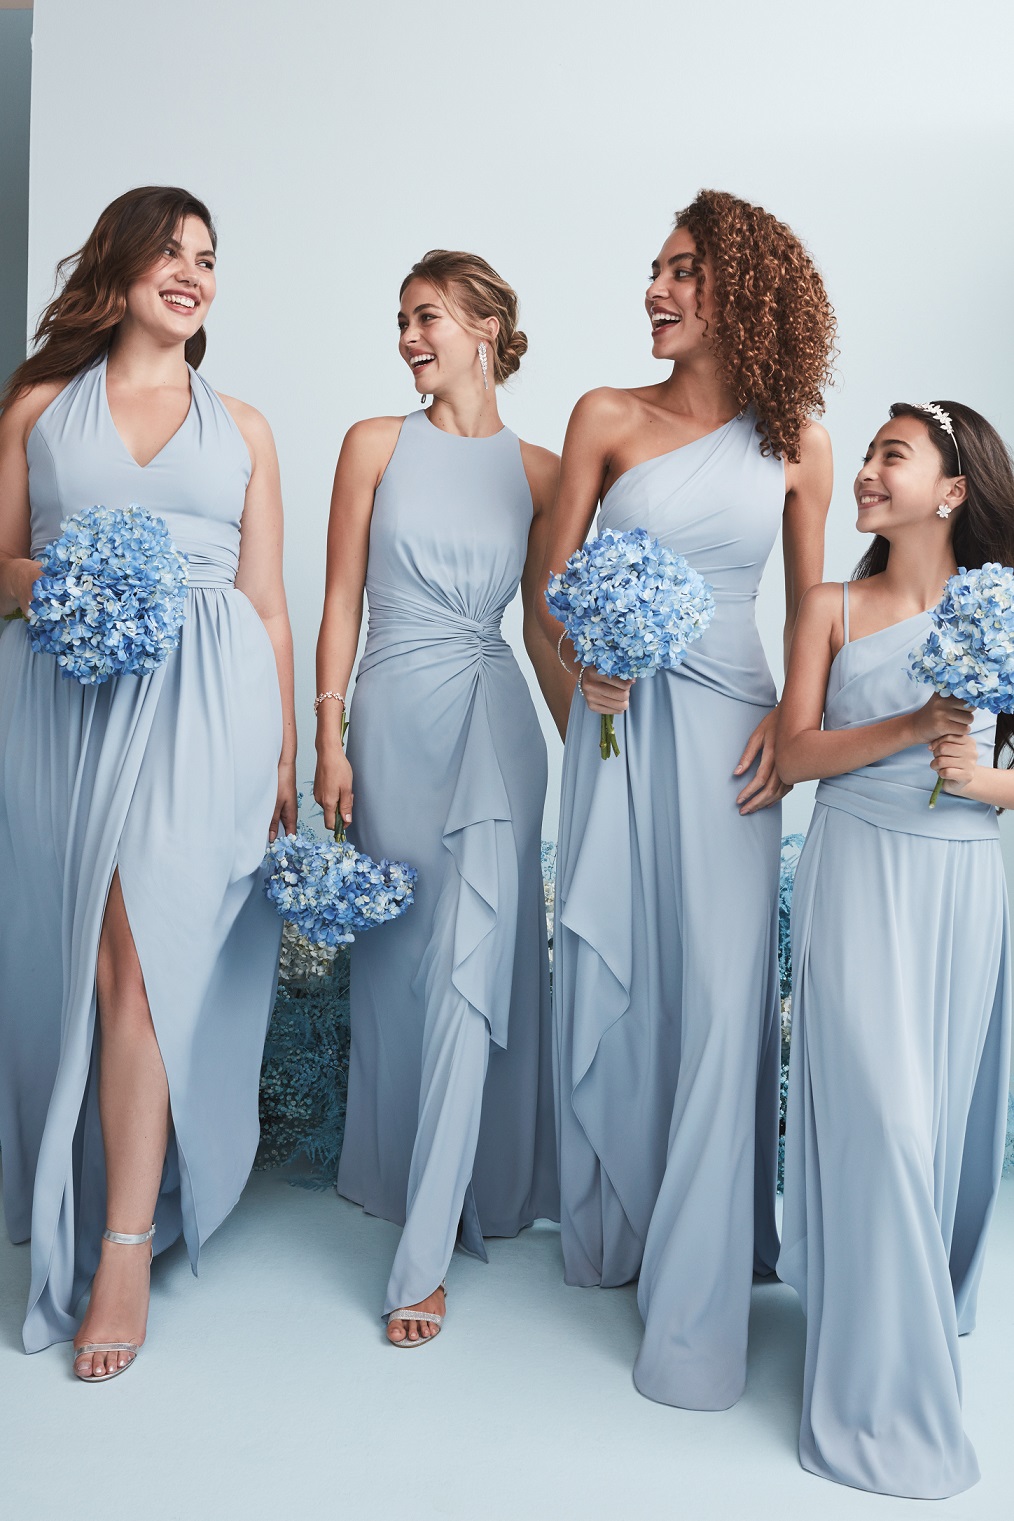 Four bridesmaids in long dusty blue bridesmaid dresses